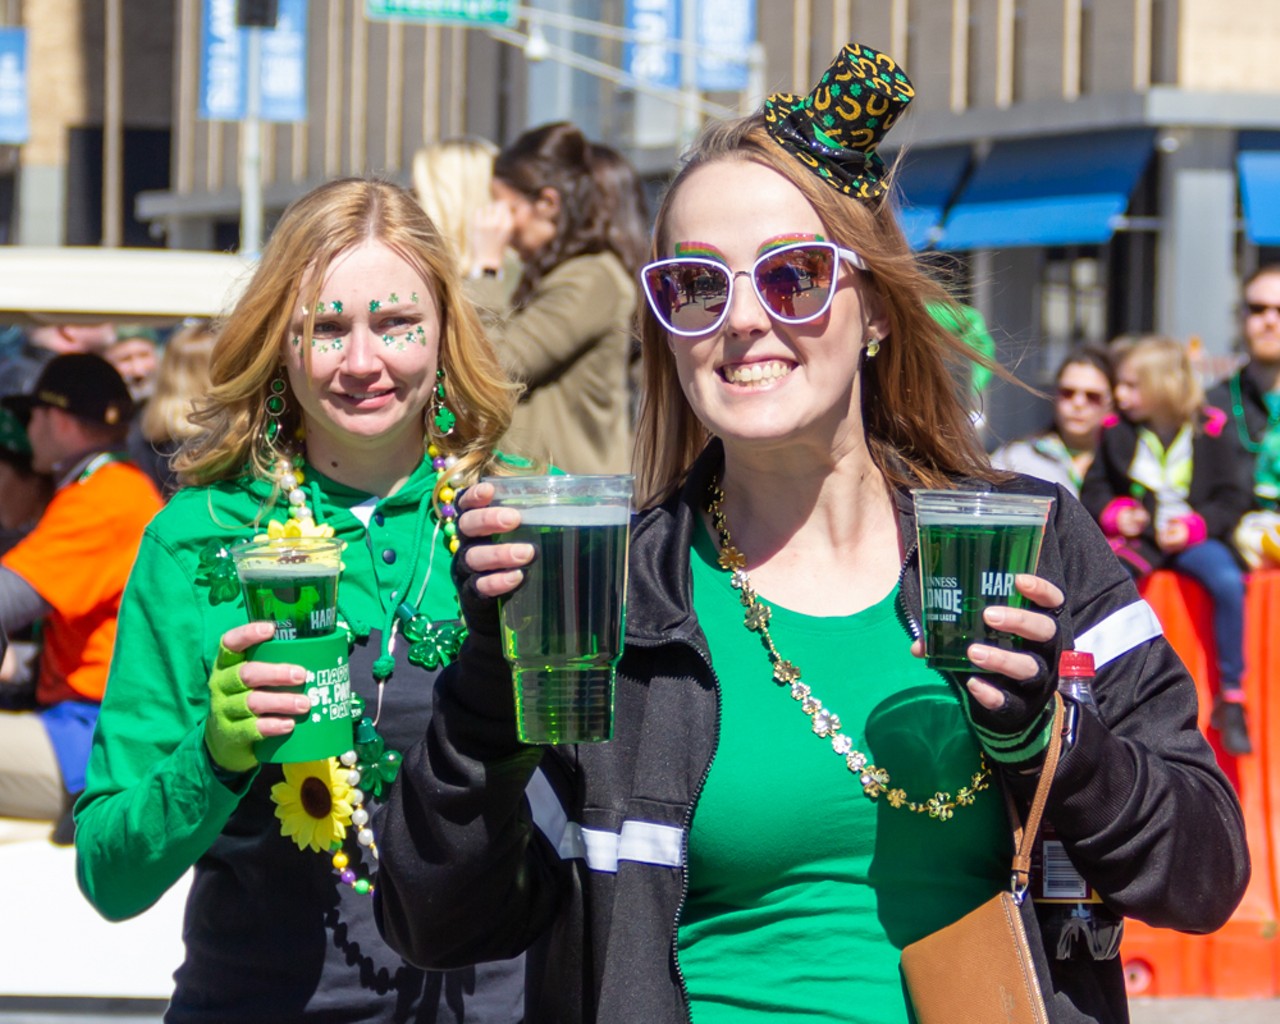 The St. Patrick's Day Parade in Downtown St. Louis Was a Breath O' Fresh Air